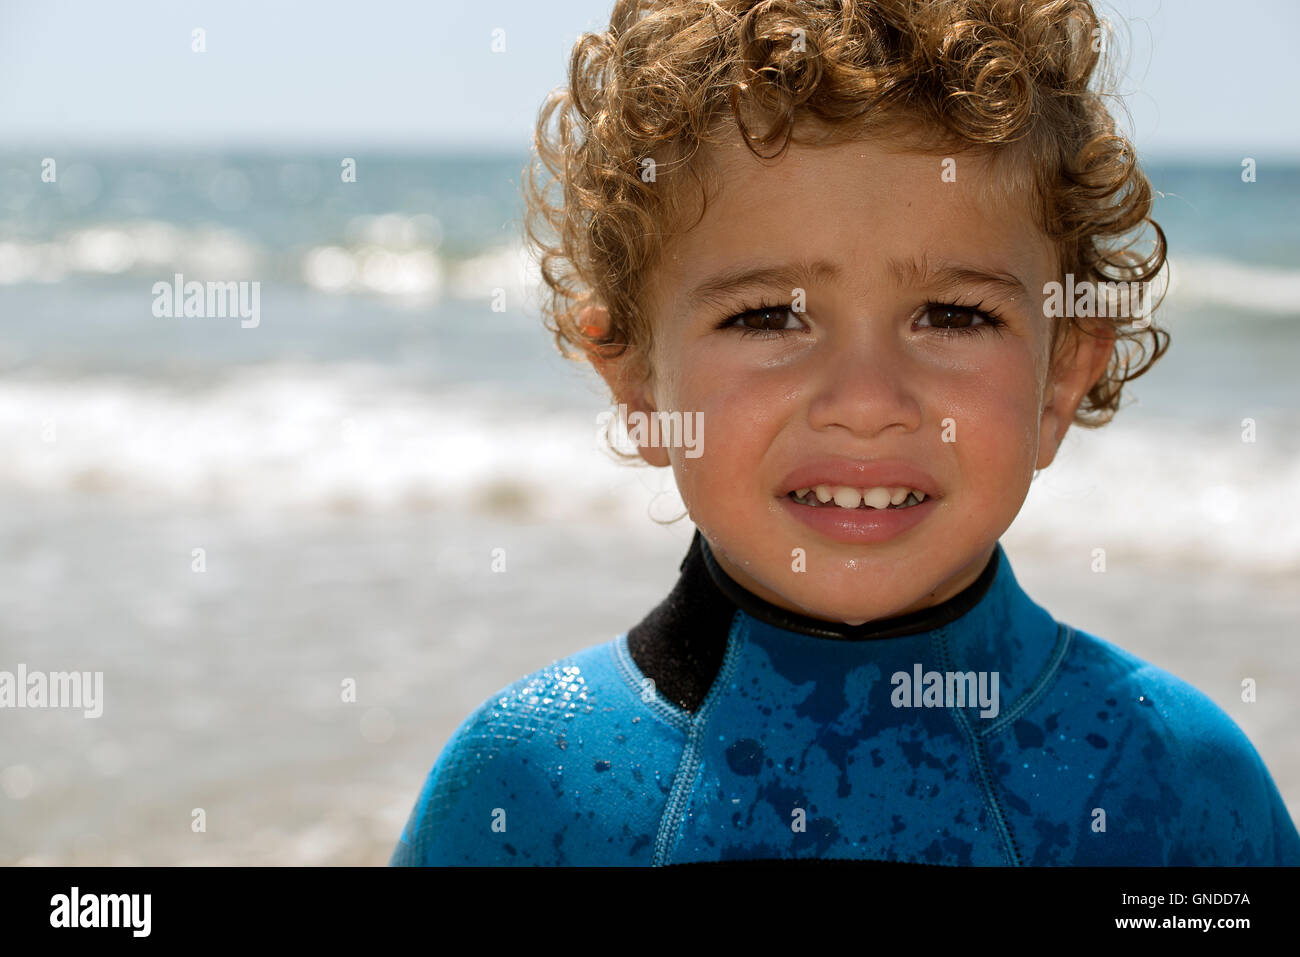 portrait of young boy by a sand beach in diving suit Stock Photo